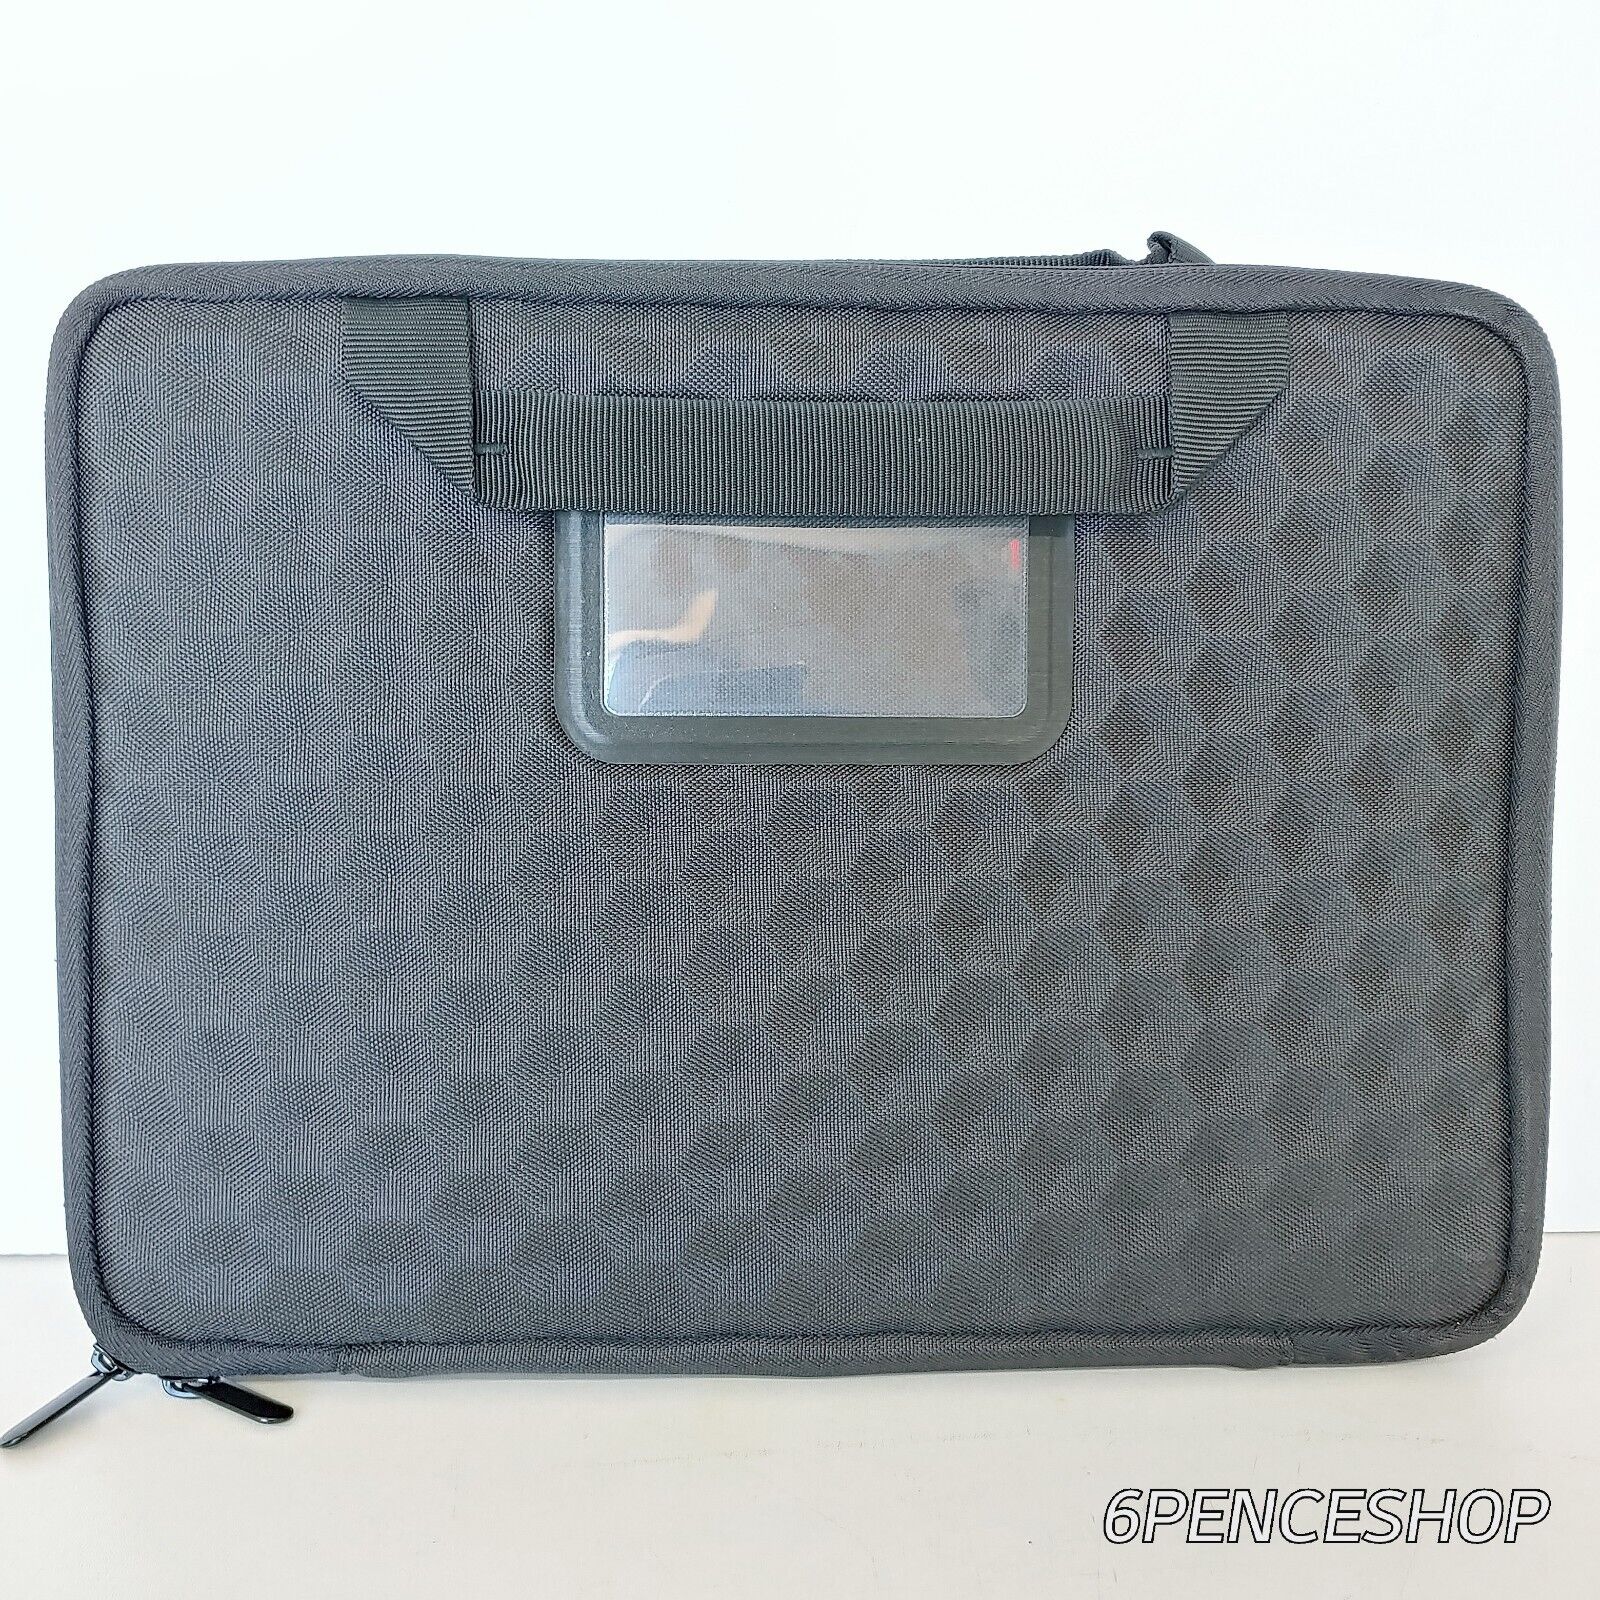 OB Belkin Air Protect B2A079-C00 Carrying Case